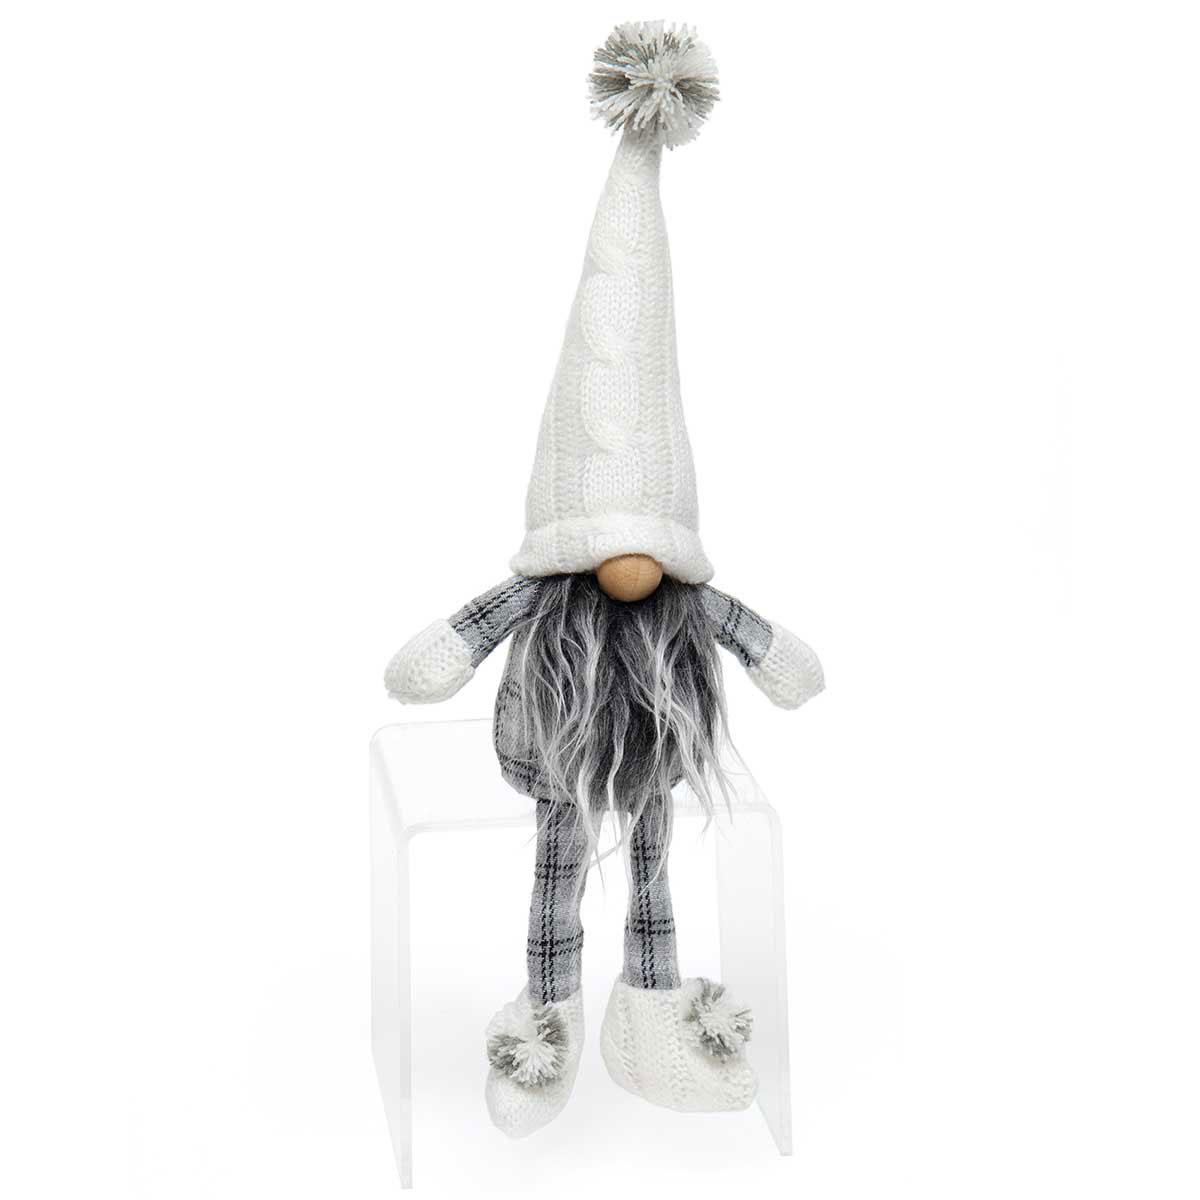 Pom-Pom Gnome Grey/Cream with Wired Cable Knit Sweater Hat Small